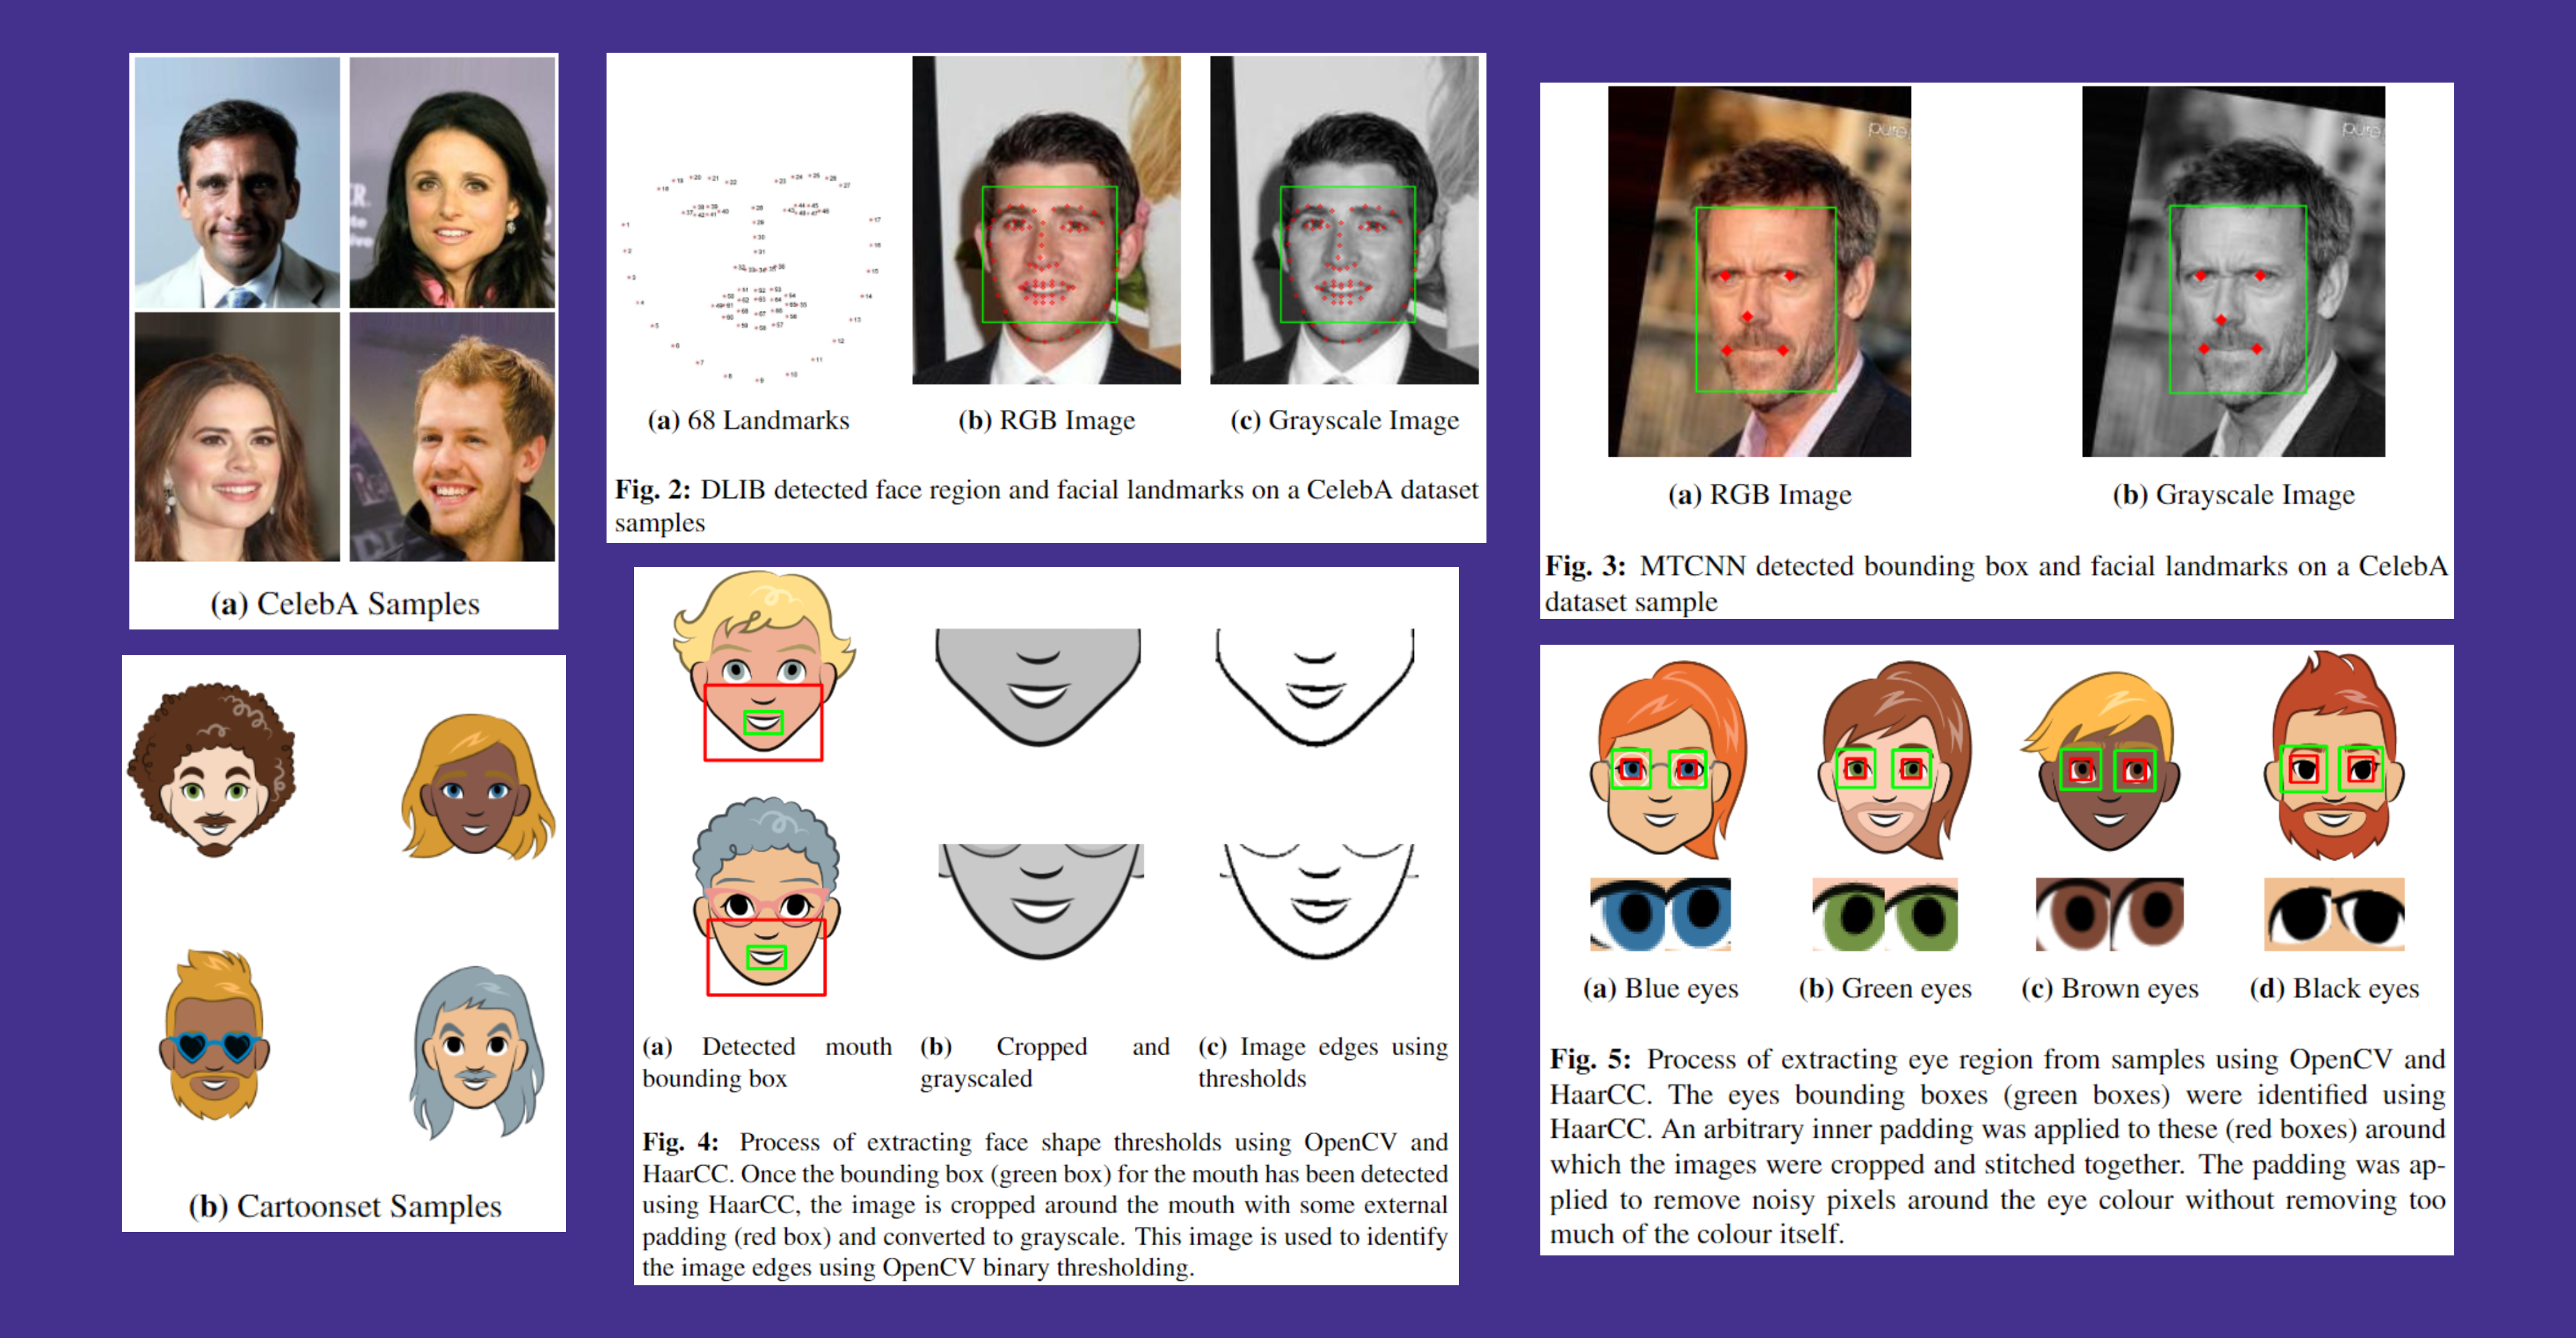 ML Image Classification and Facial Recognition